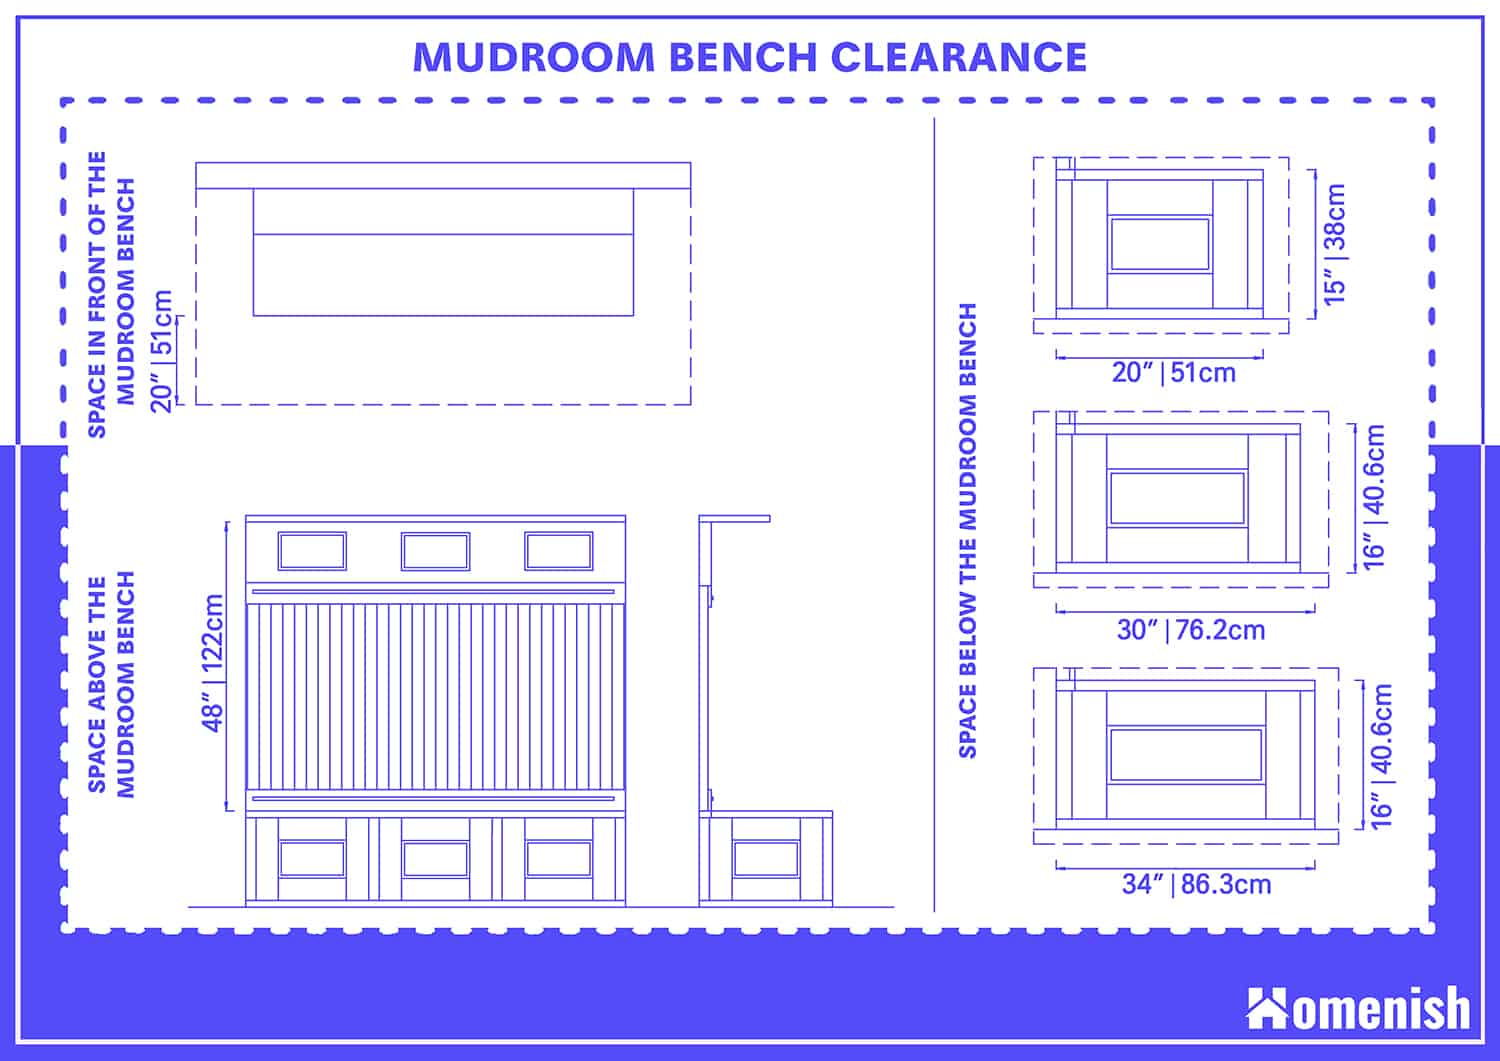 Mudroom Bench Clearance